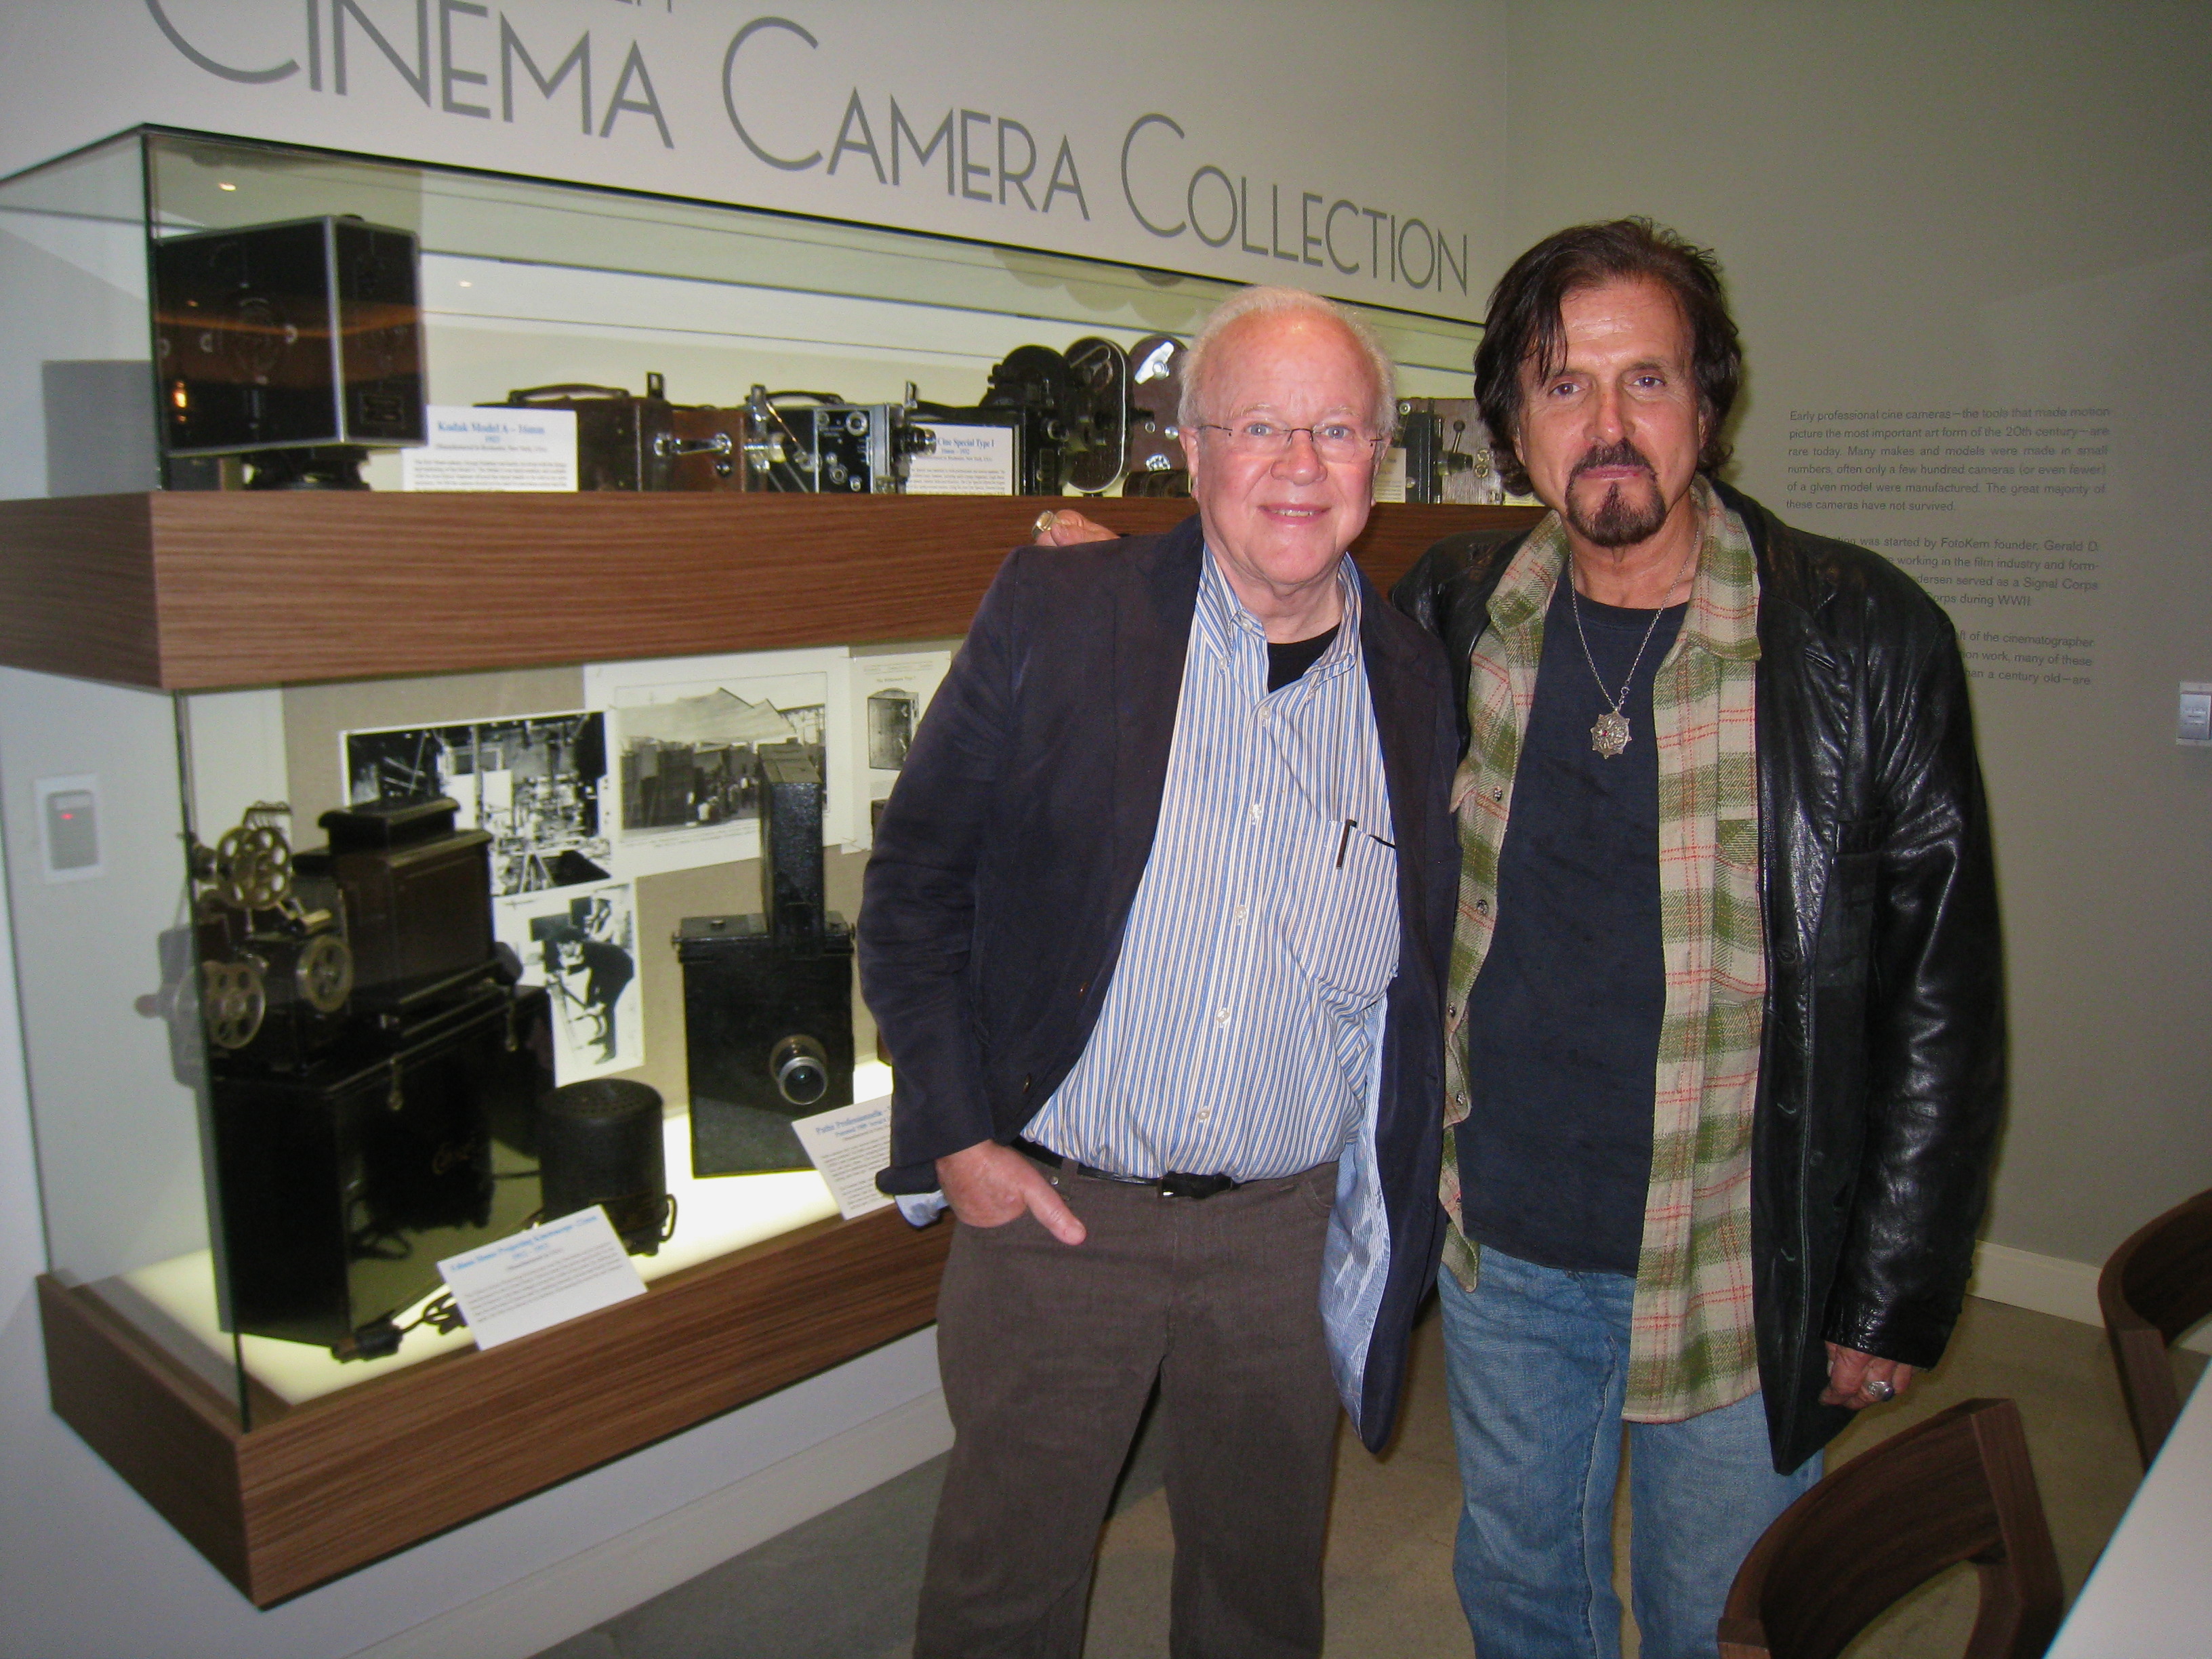 Francesco here with Douglas Trumbull's screening of his new cutting edge film technology high intensity 3D called 